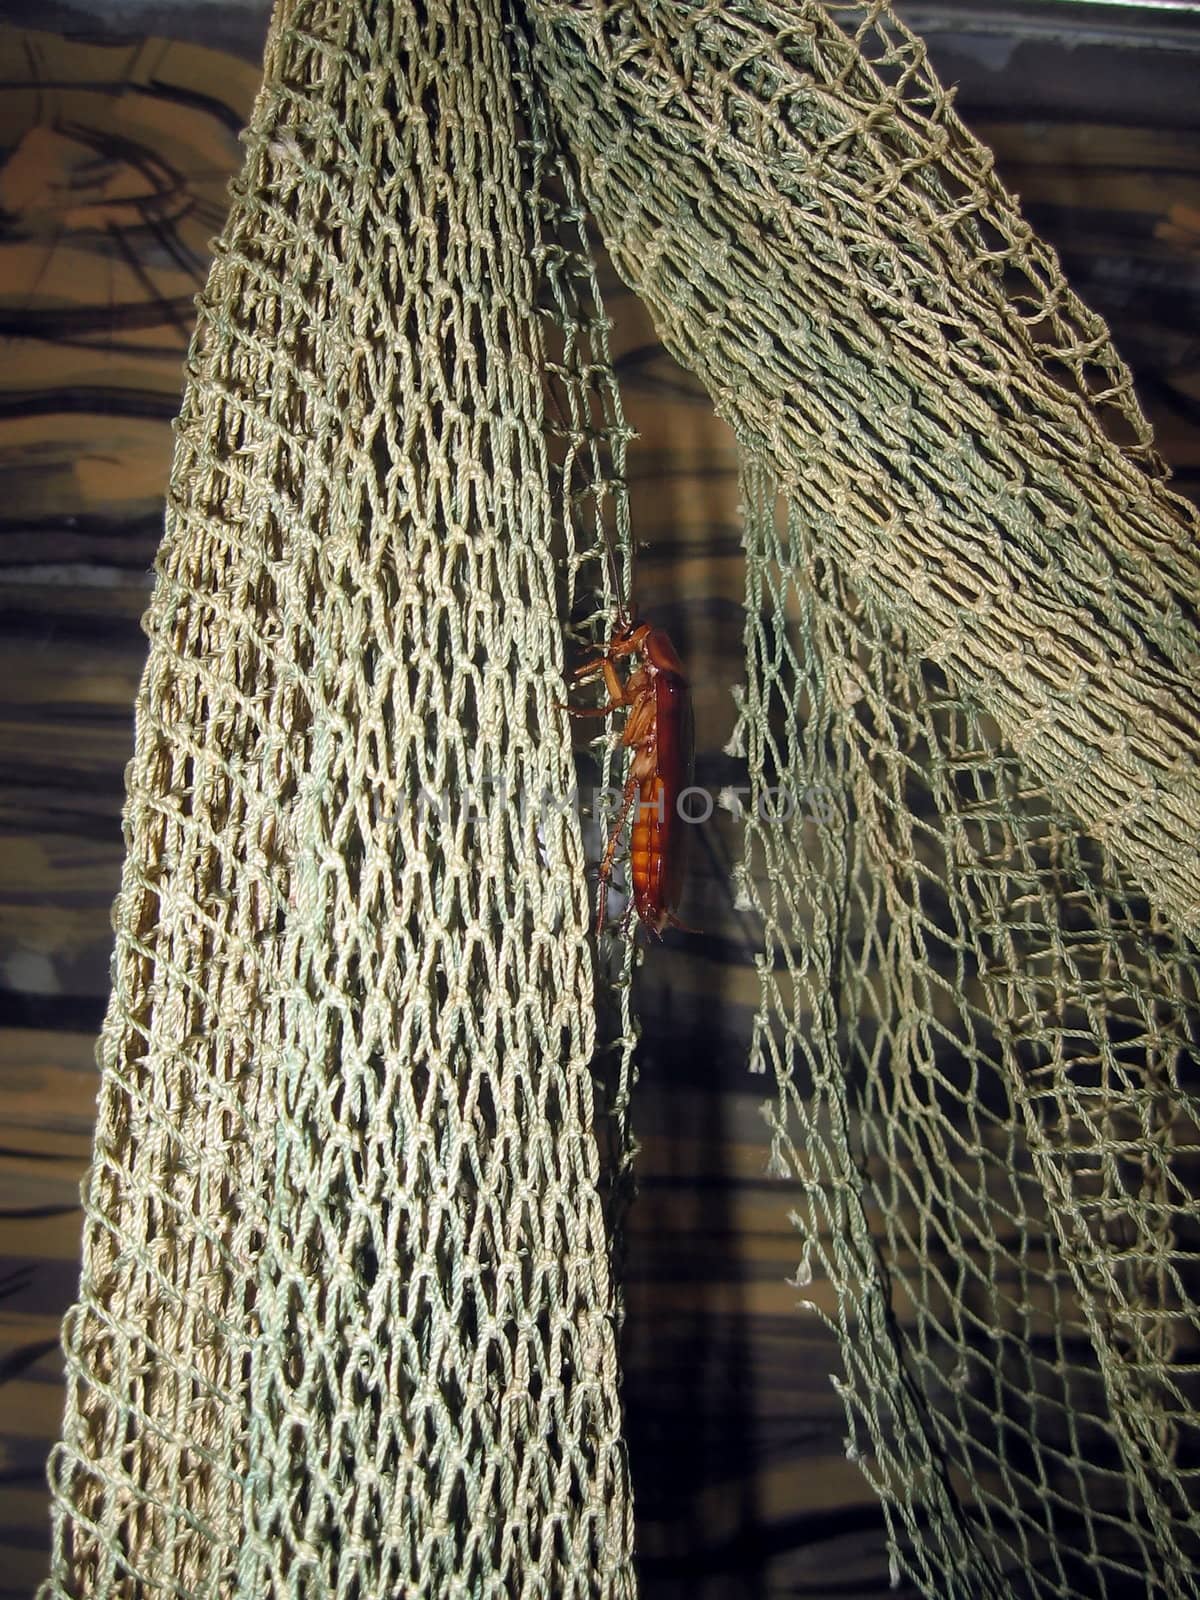 Brown cockroach sits on the plaited net